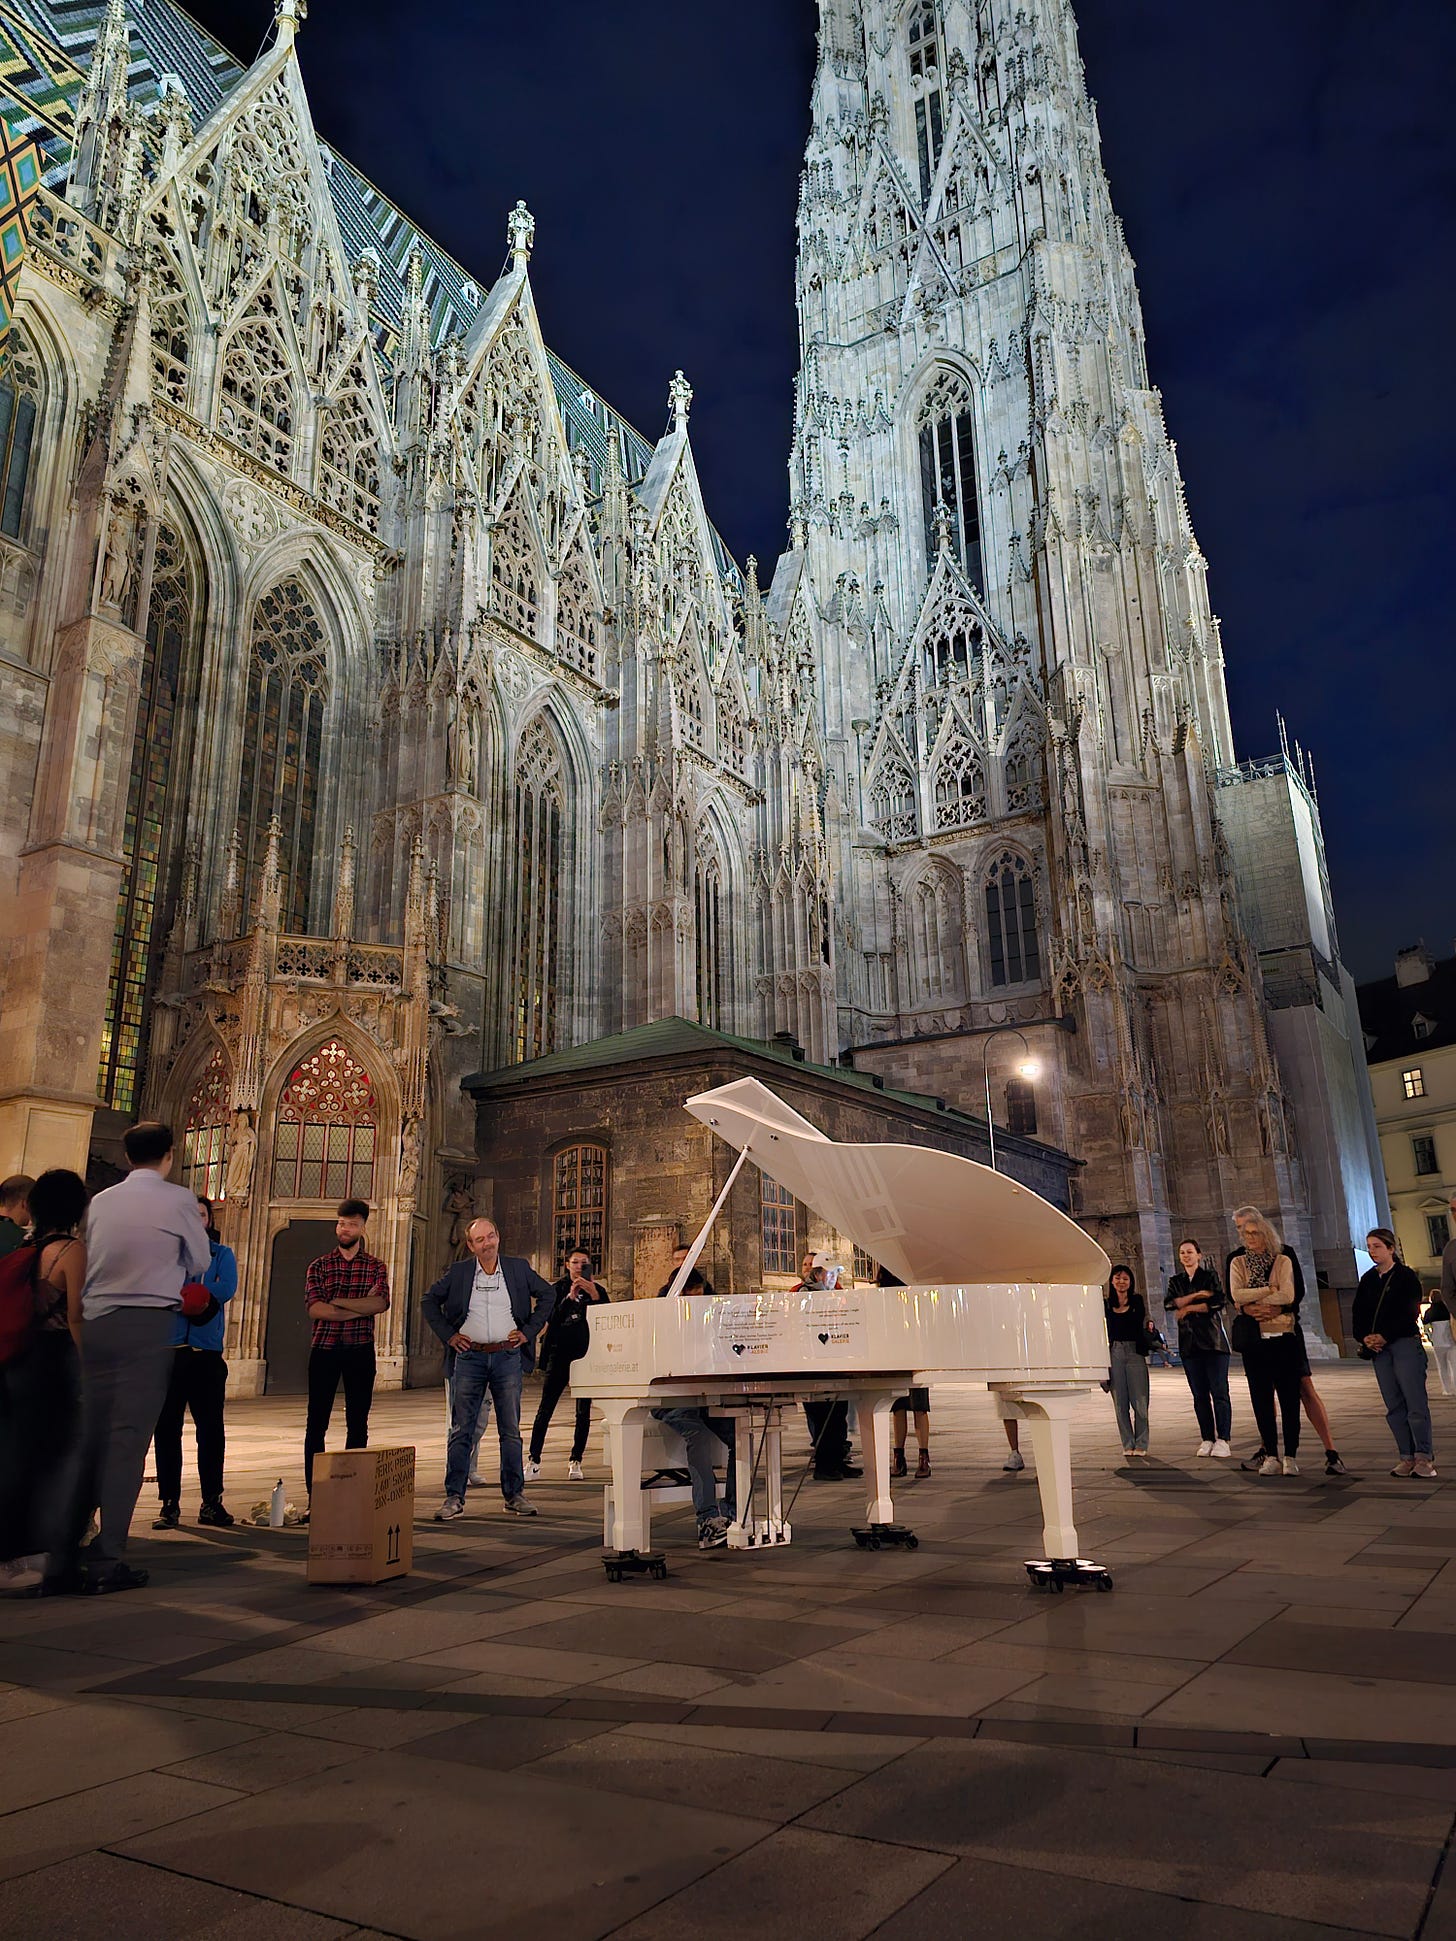 Piano infront of a gothic church